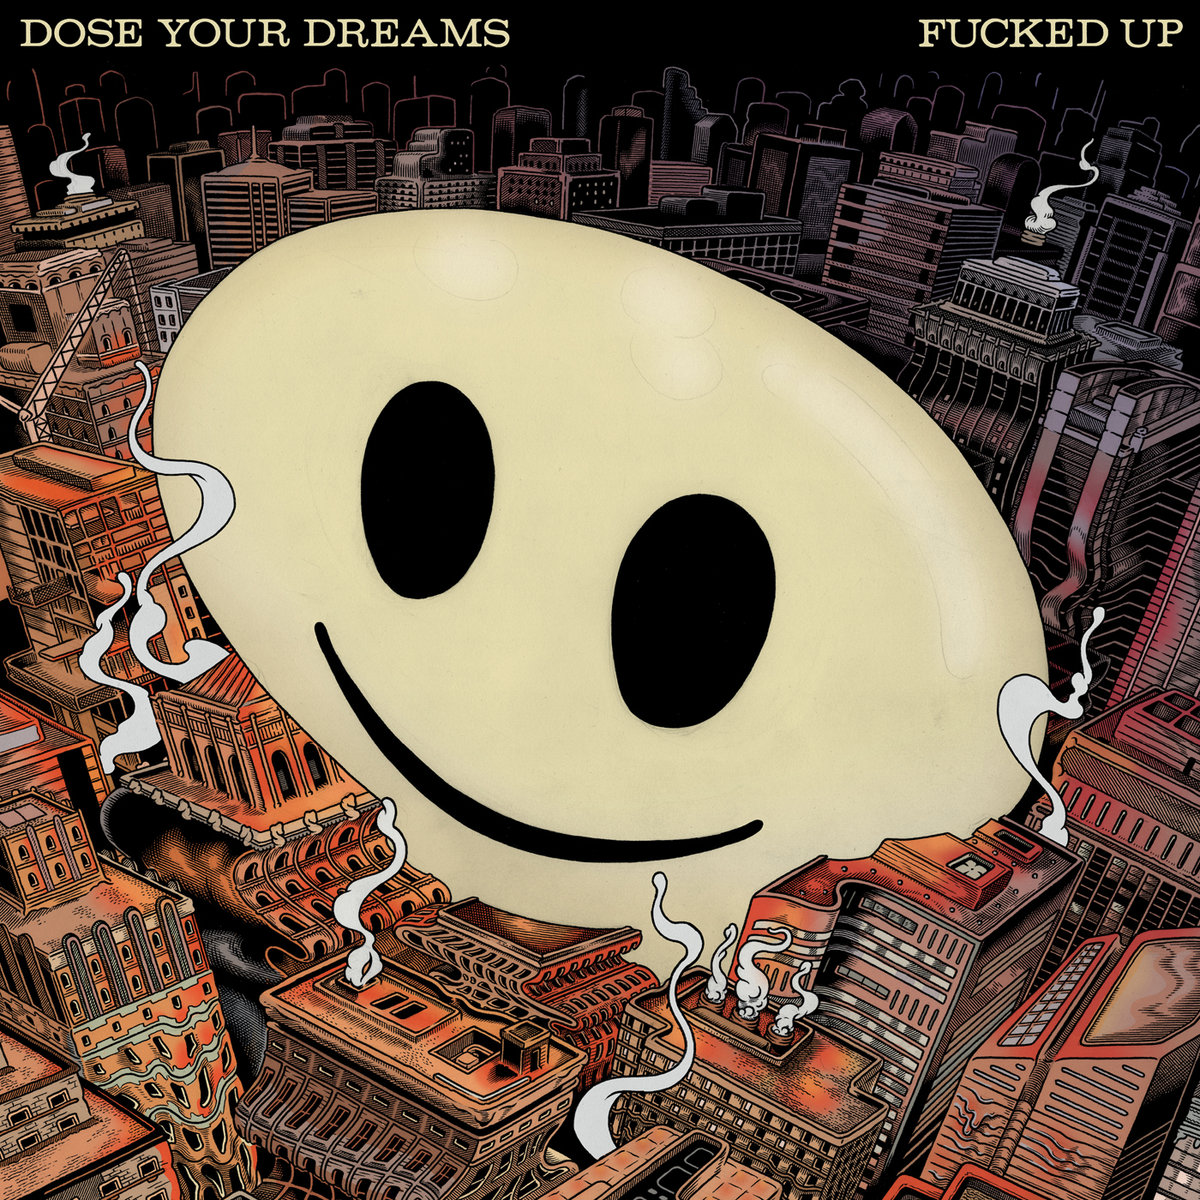 Fucked Up Dose Your Dreams